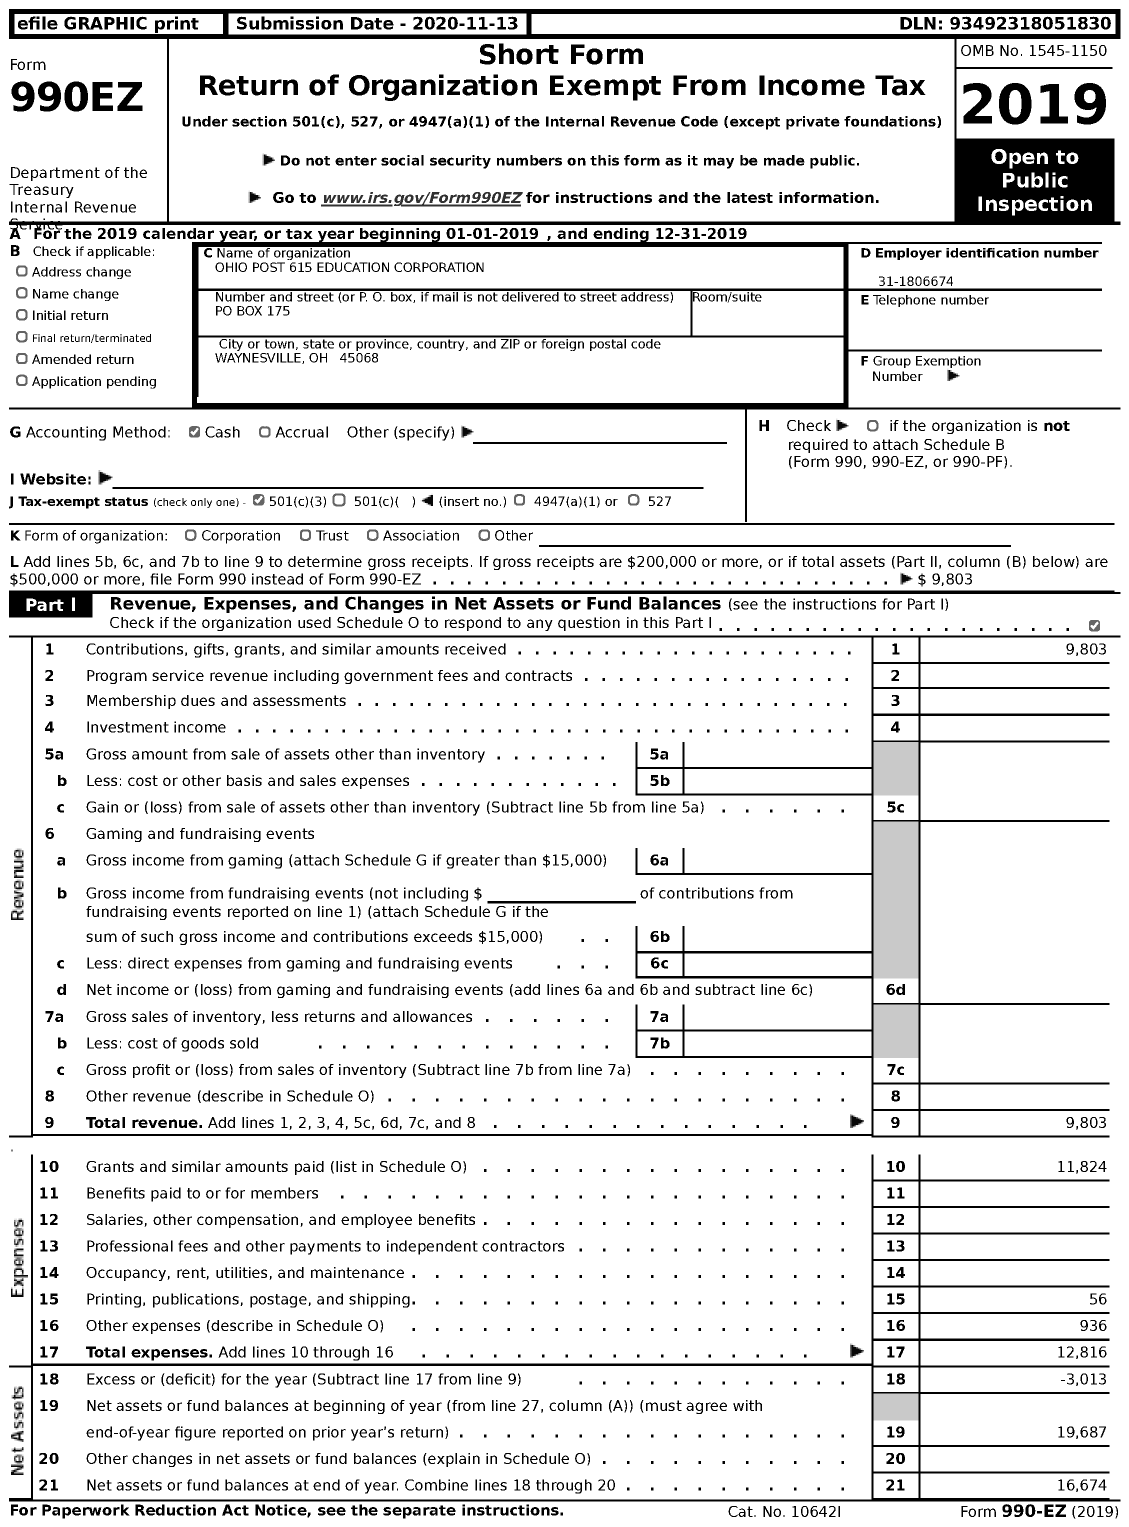 Image of first page of 2019 Form 990EZ for Ohio Post 615 Education Corporation